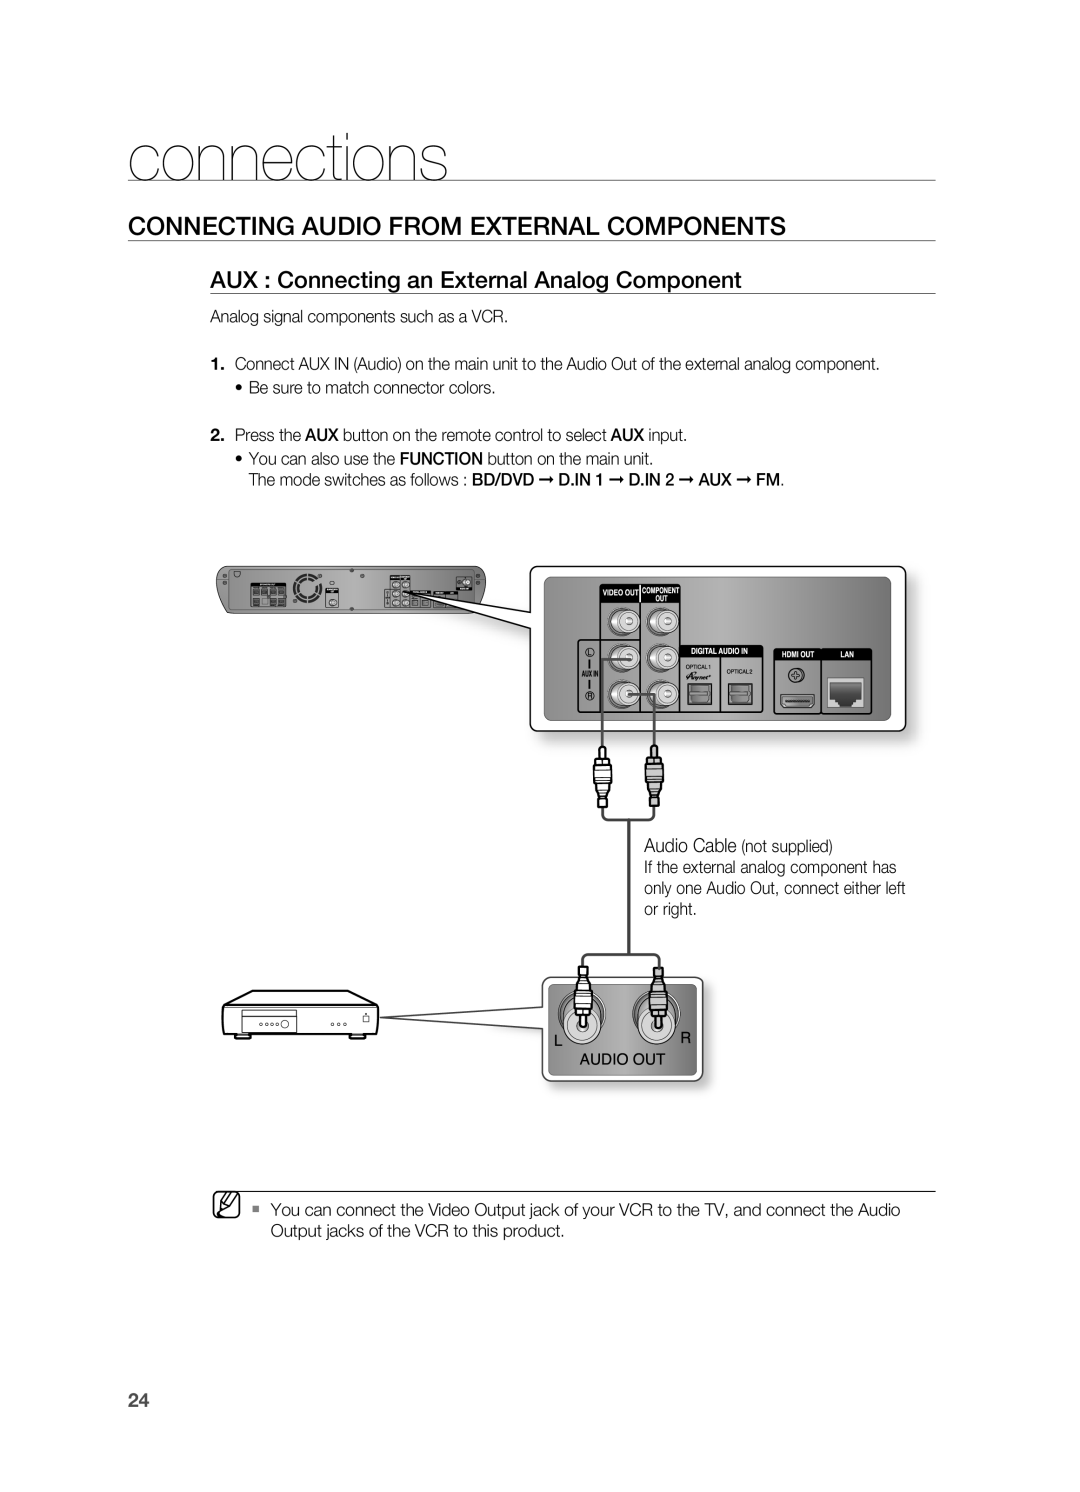 Samsung AH68-02019S Connecting Audio from External Components, AUX : Connecting an External Analog Component, connections 